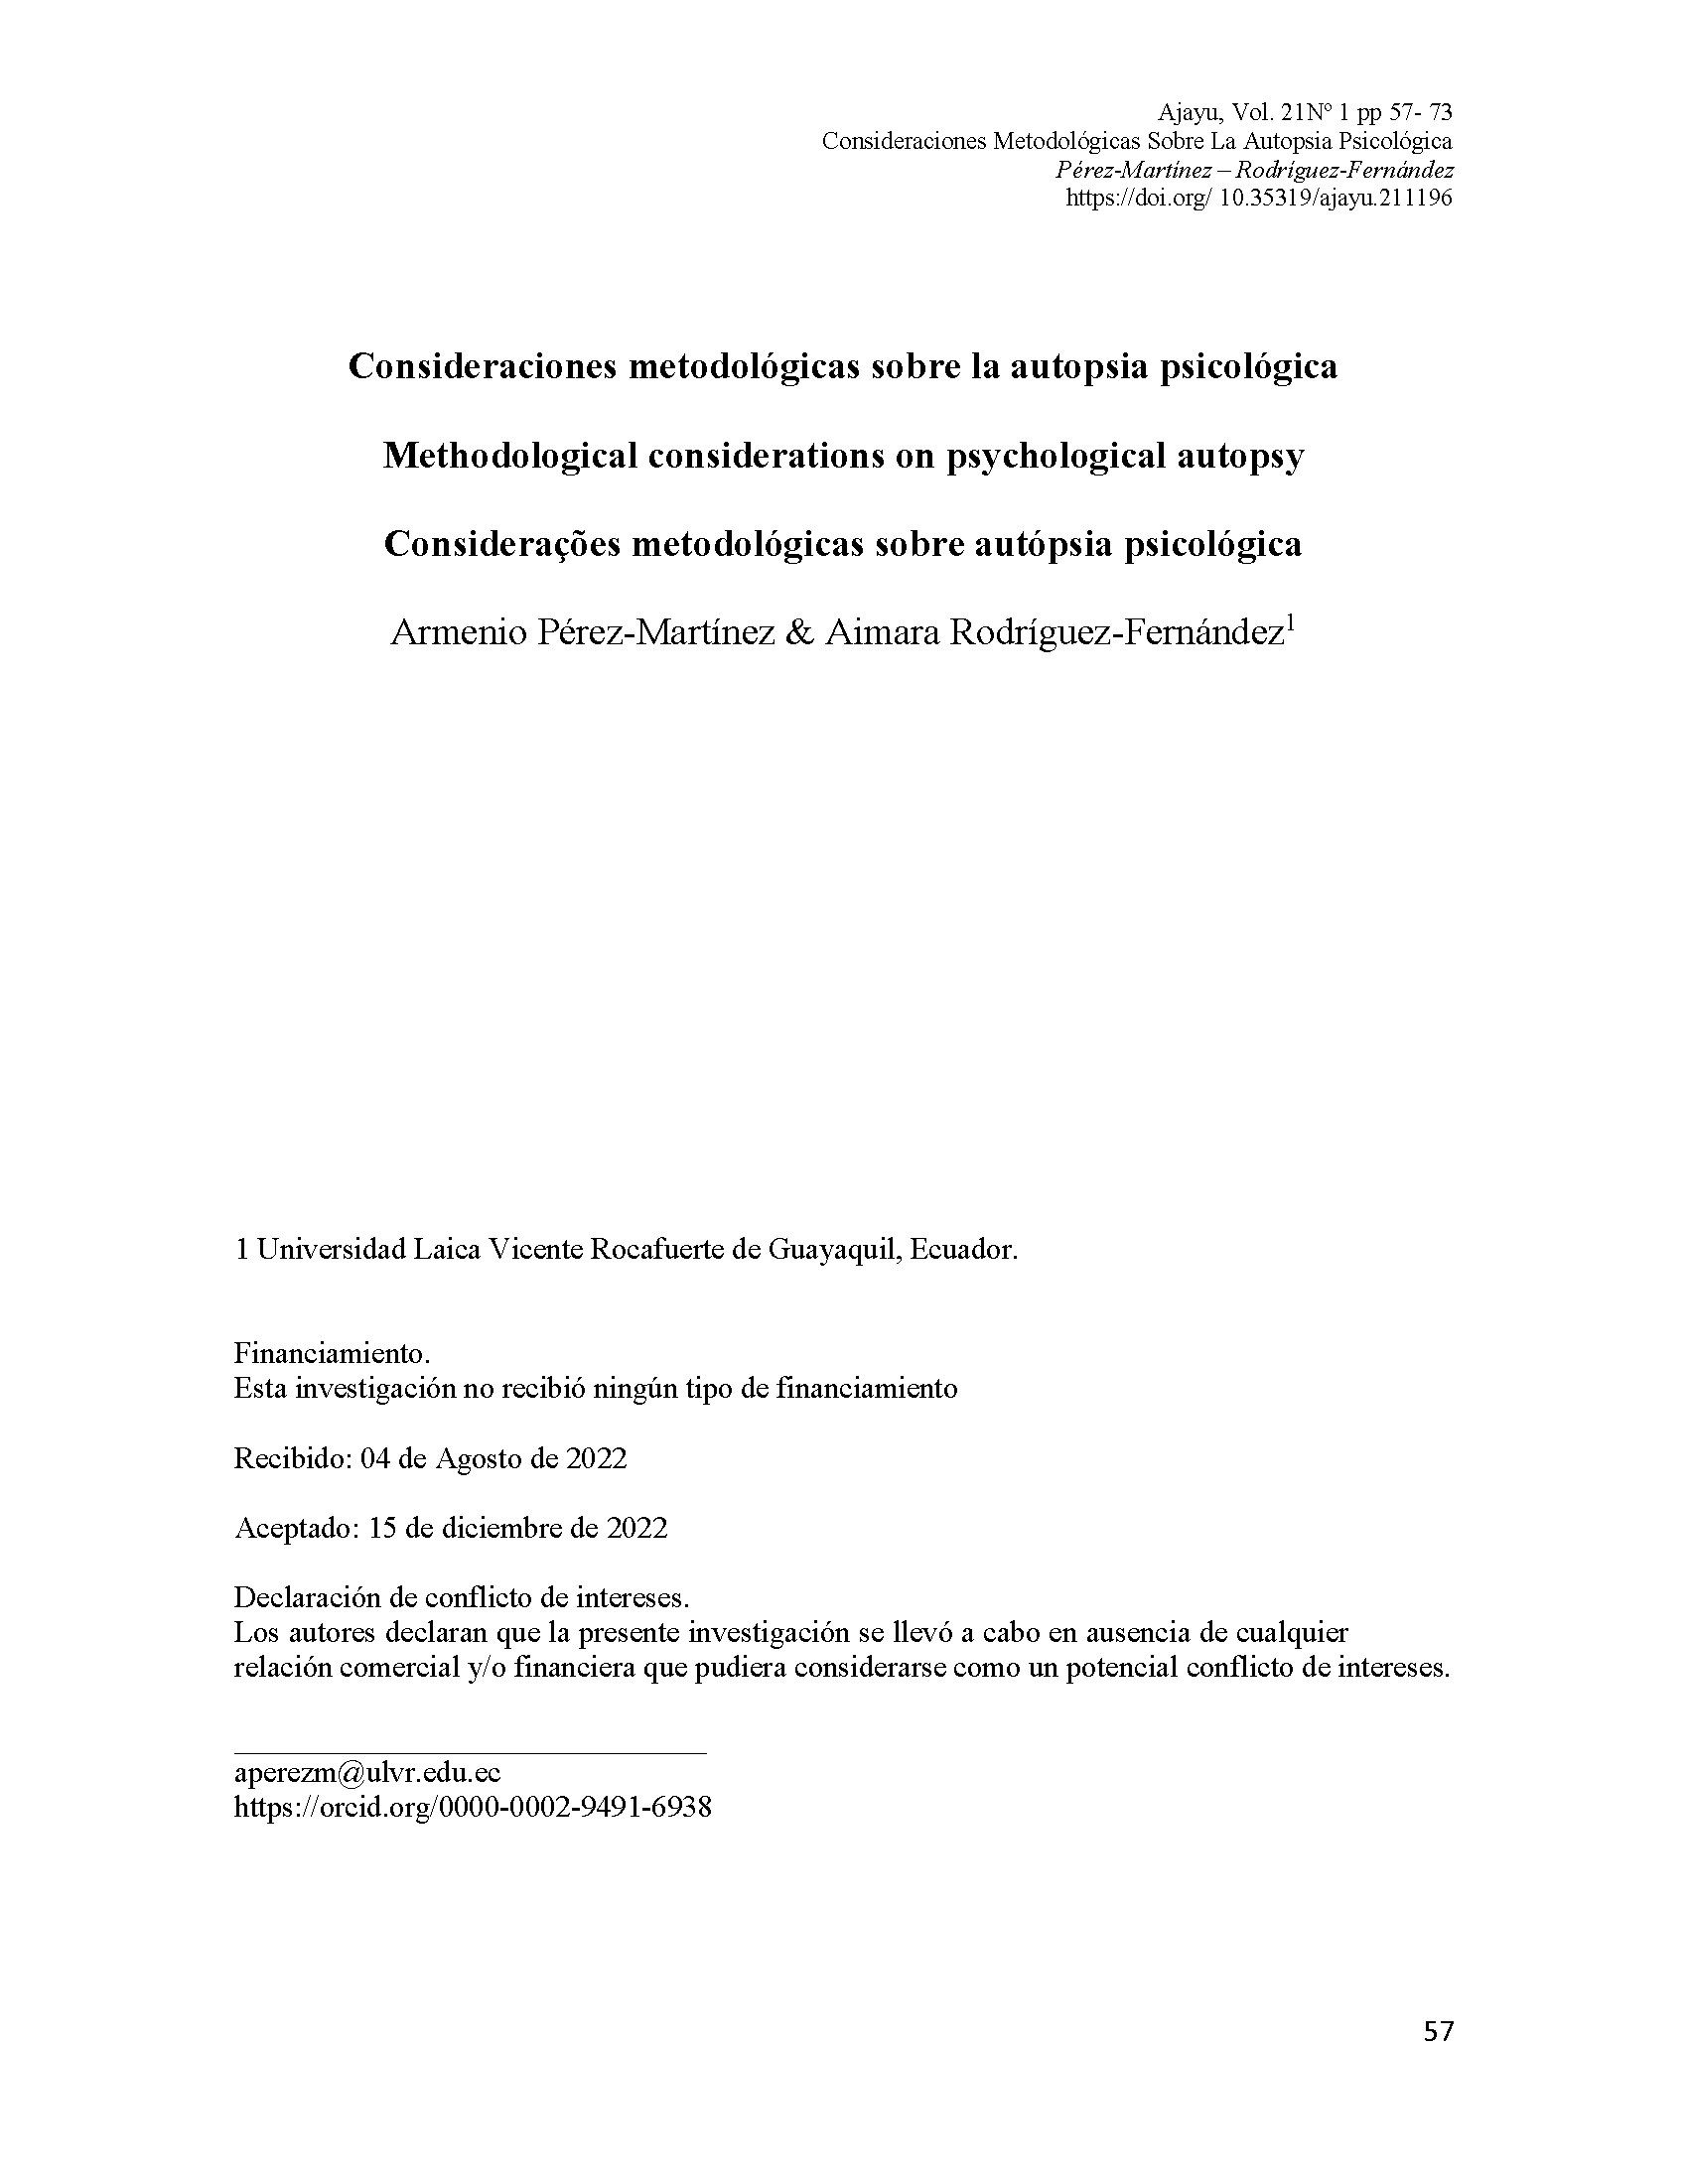  Methodological considerations on psychological autopsy 